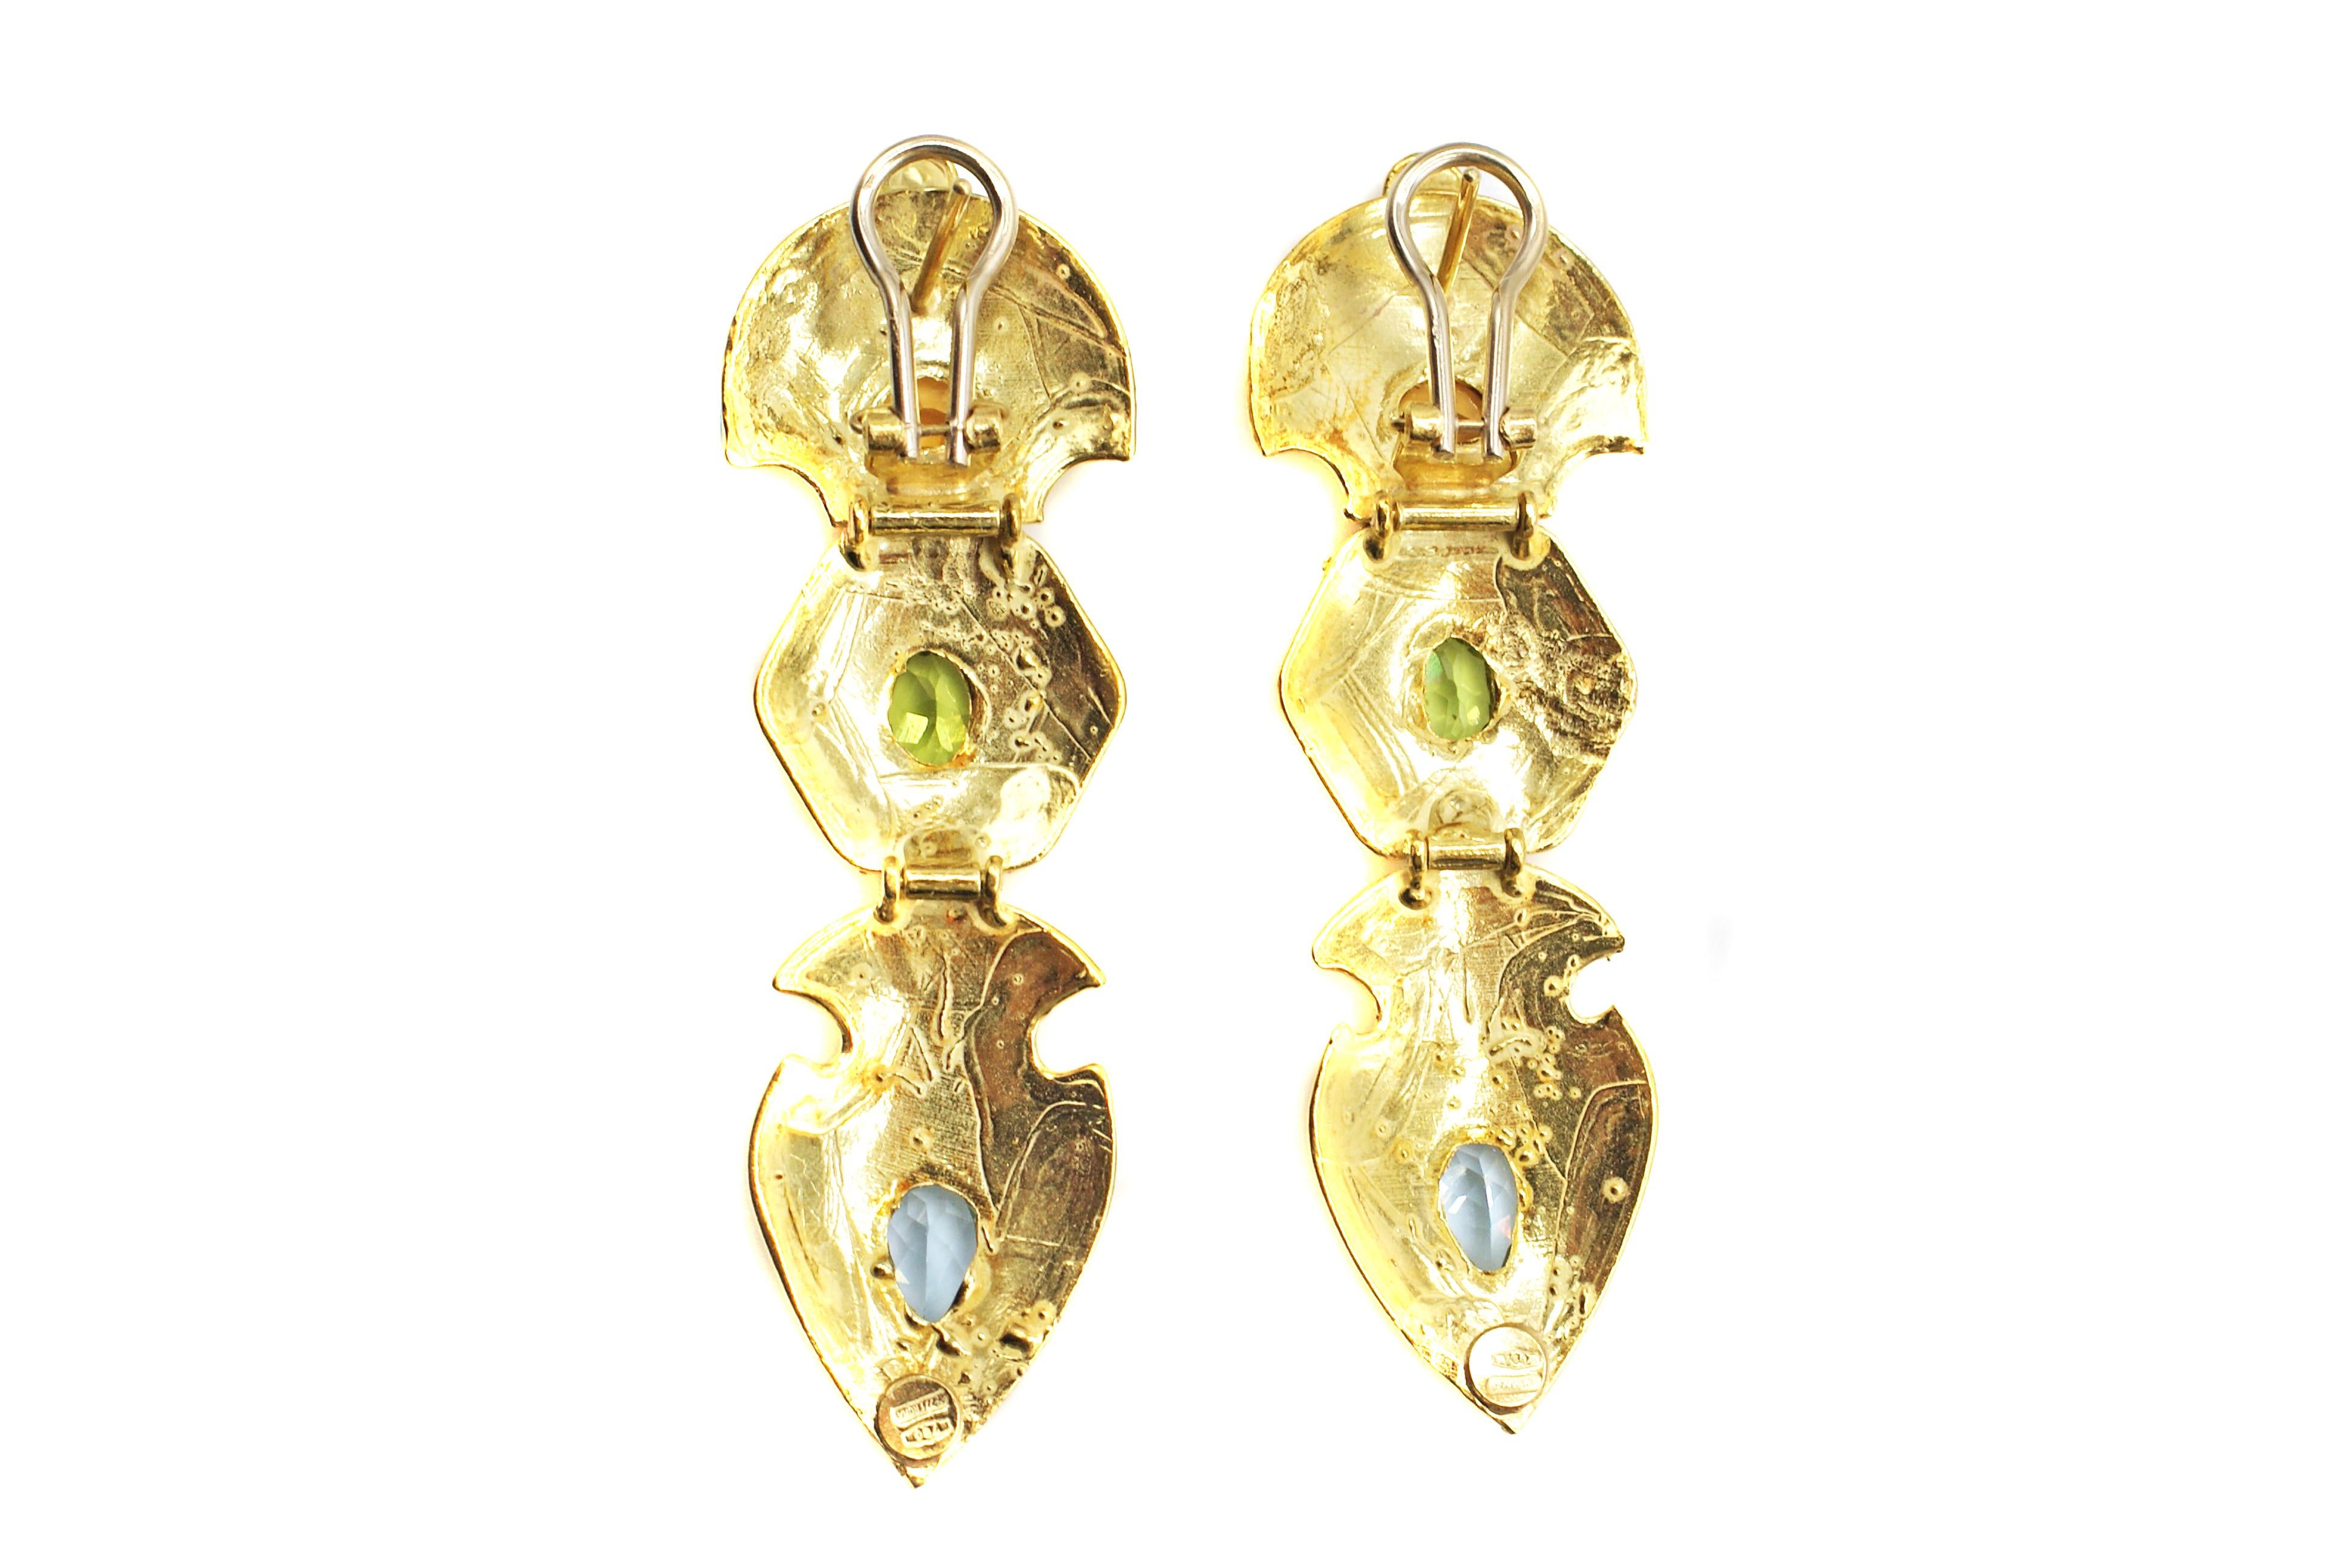 These extremely fashionable and fun dangling earrings have been masterfully designed to resemble the jewels from the Etruscan revival era. Three flexible plaques of 18 karat yellow gold have been beautifully engraved with a mat finish and